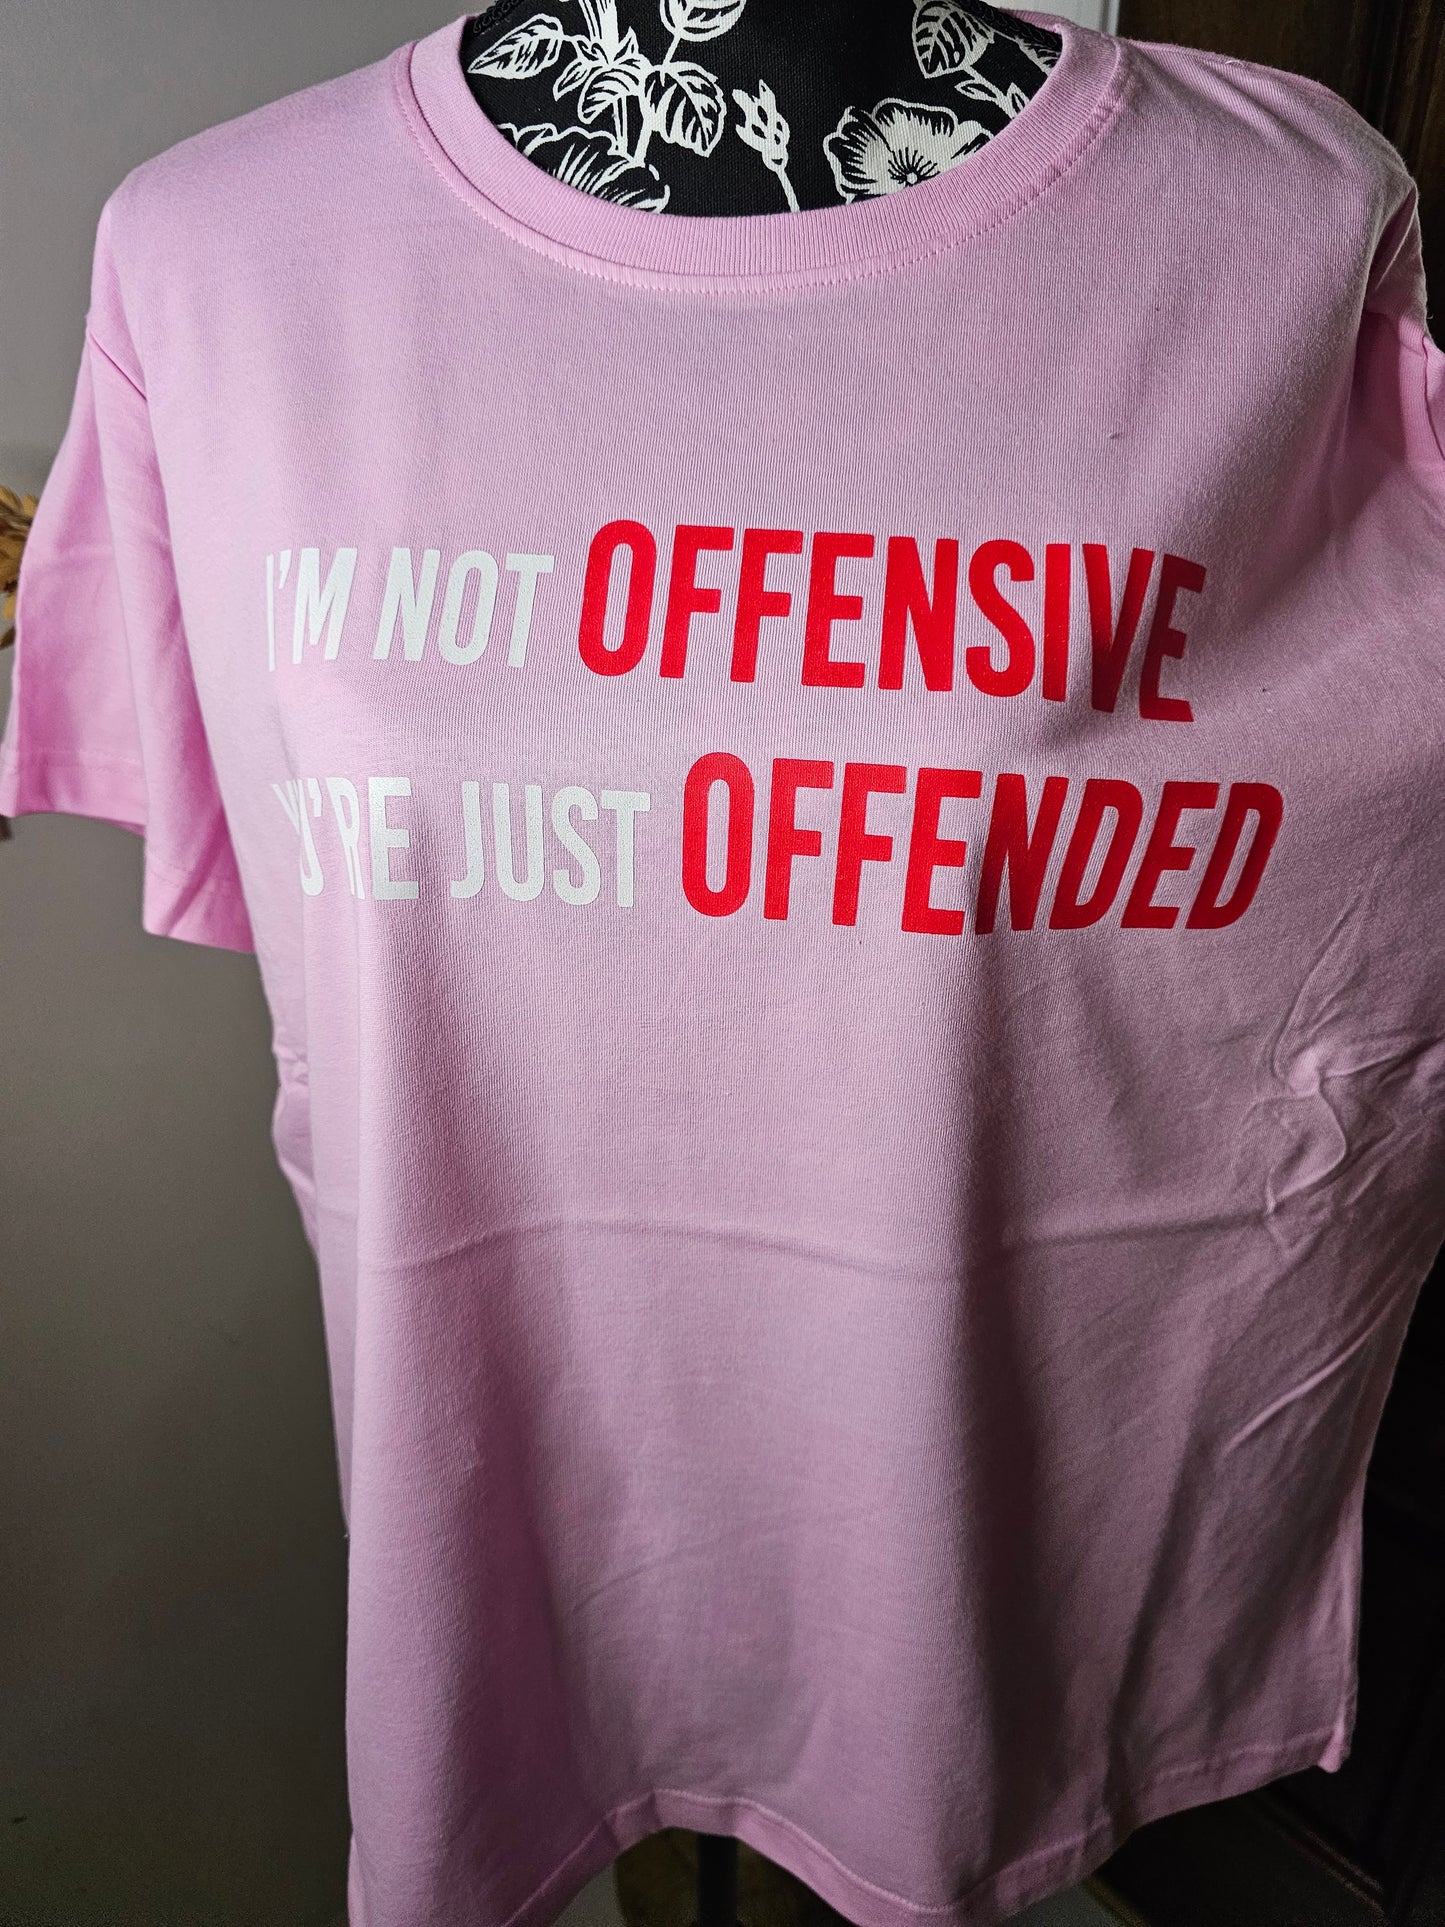 I 'm Not Offensive Your'e Just Offended Handmade Graphic T-Shirt